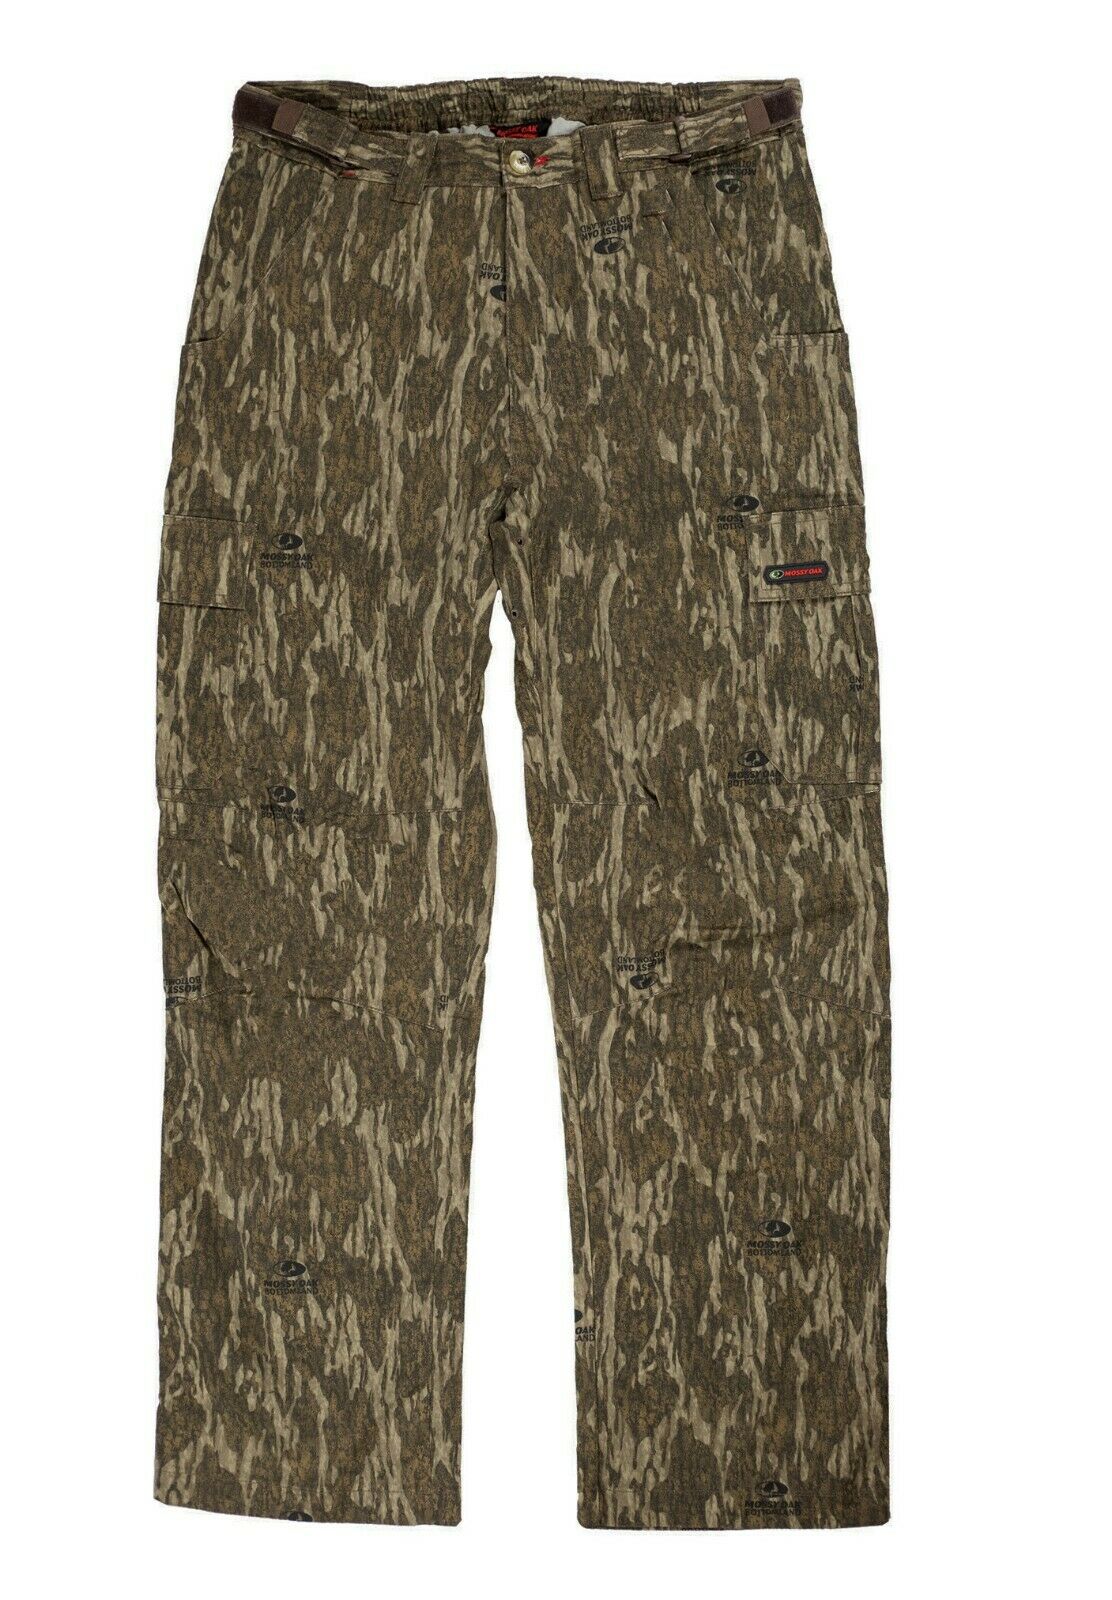 Mossy Oak Cotton Mill 2.0 Camo Hunting Pants For Men Camouflage Clothes